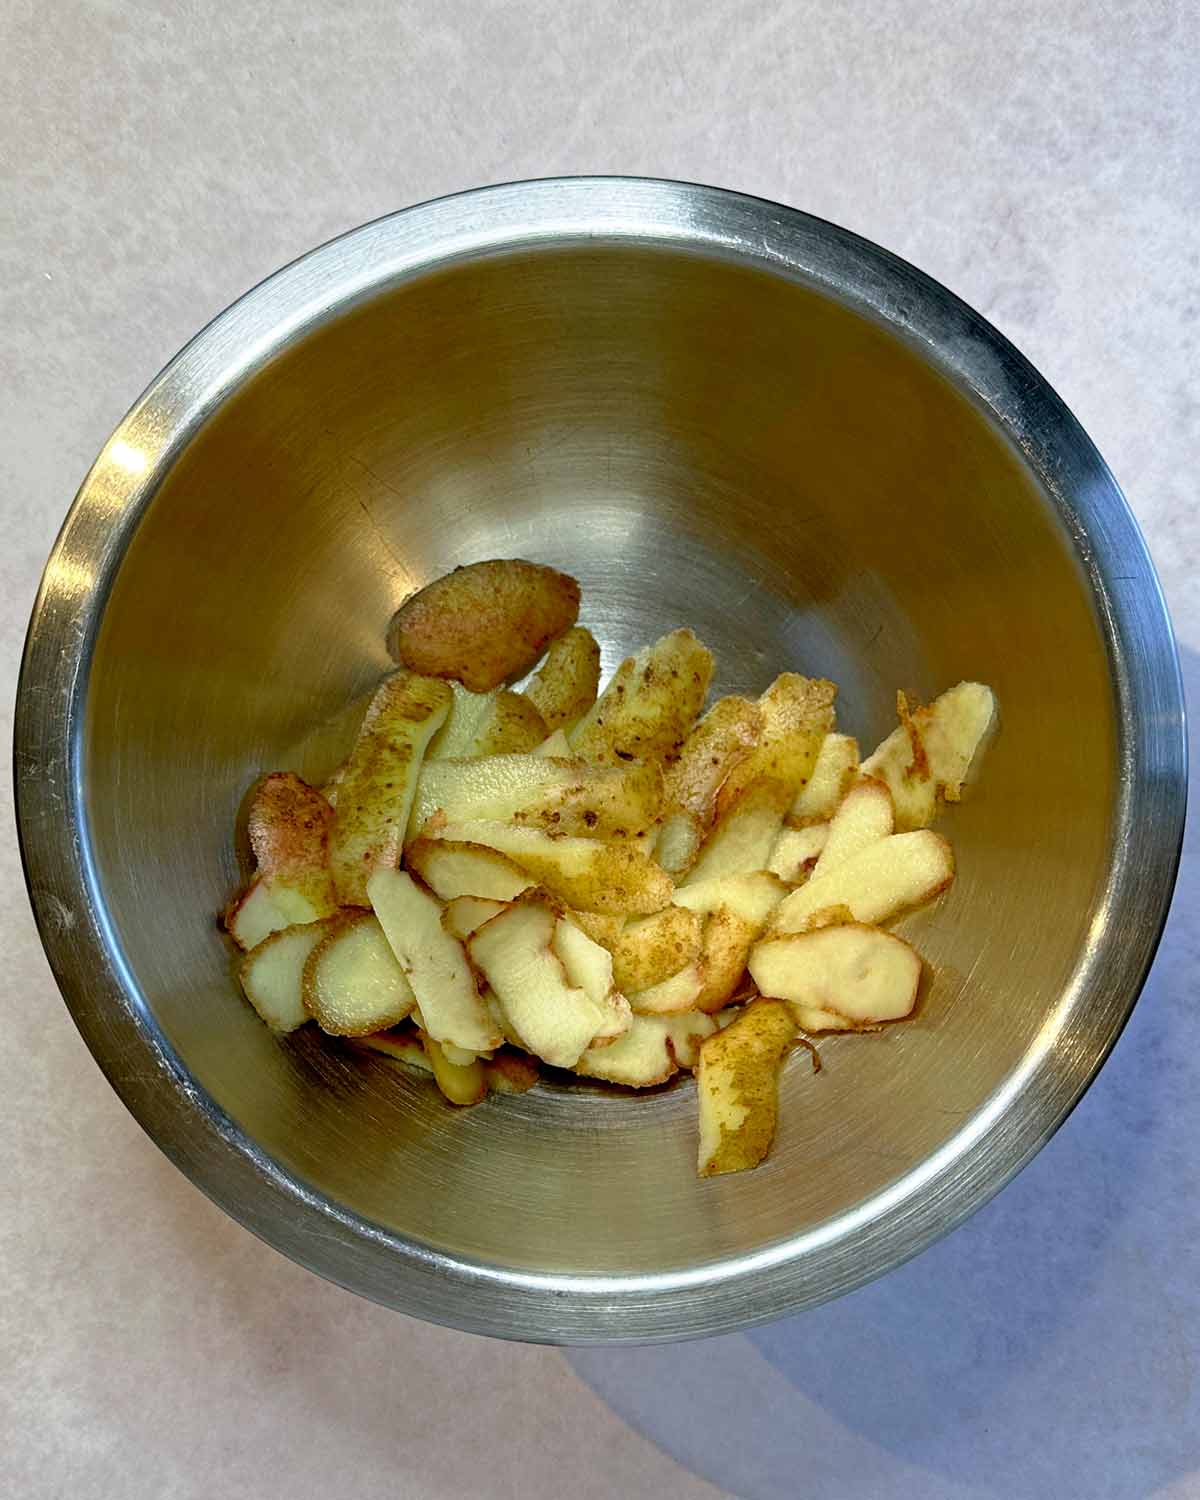 Potato peelings in a bowl with oil and seasoning.